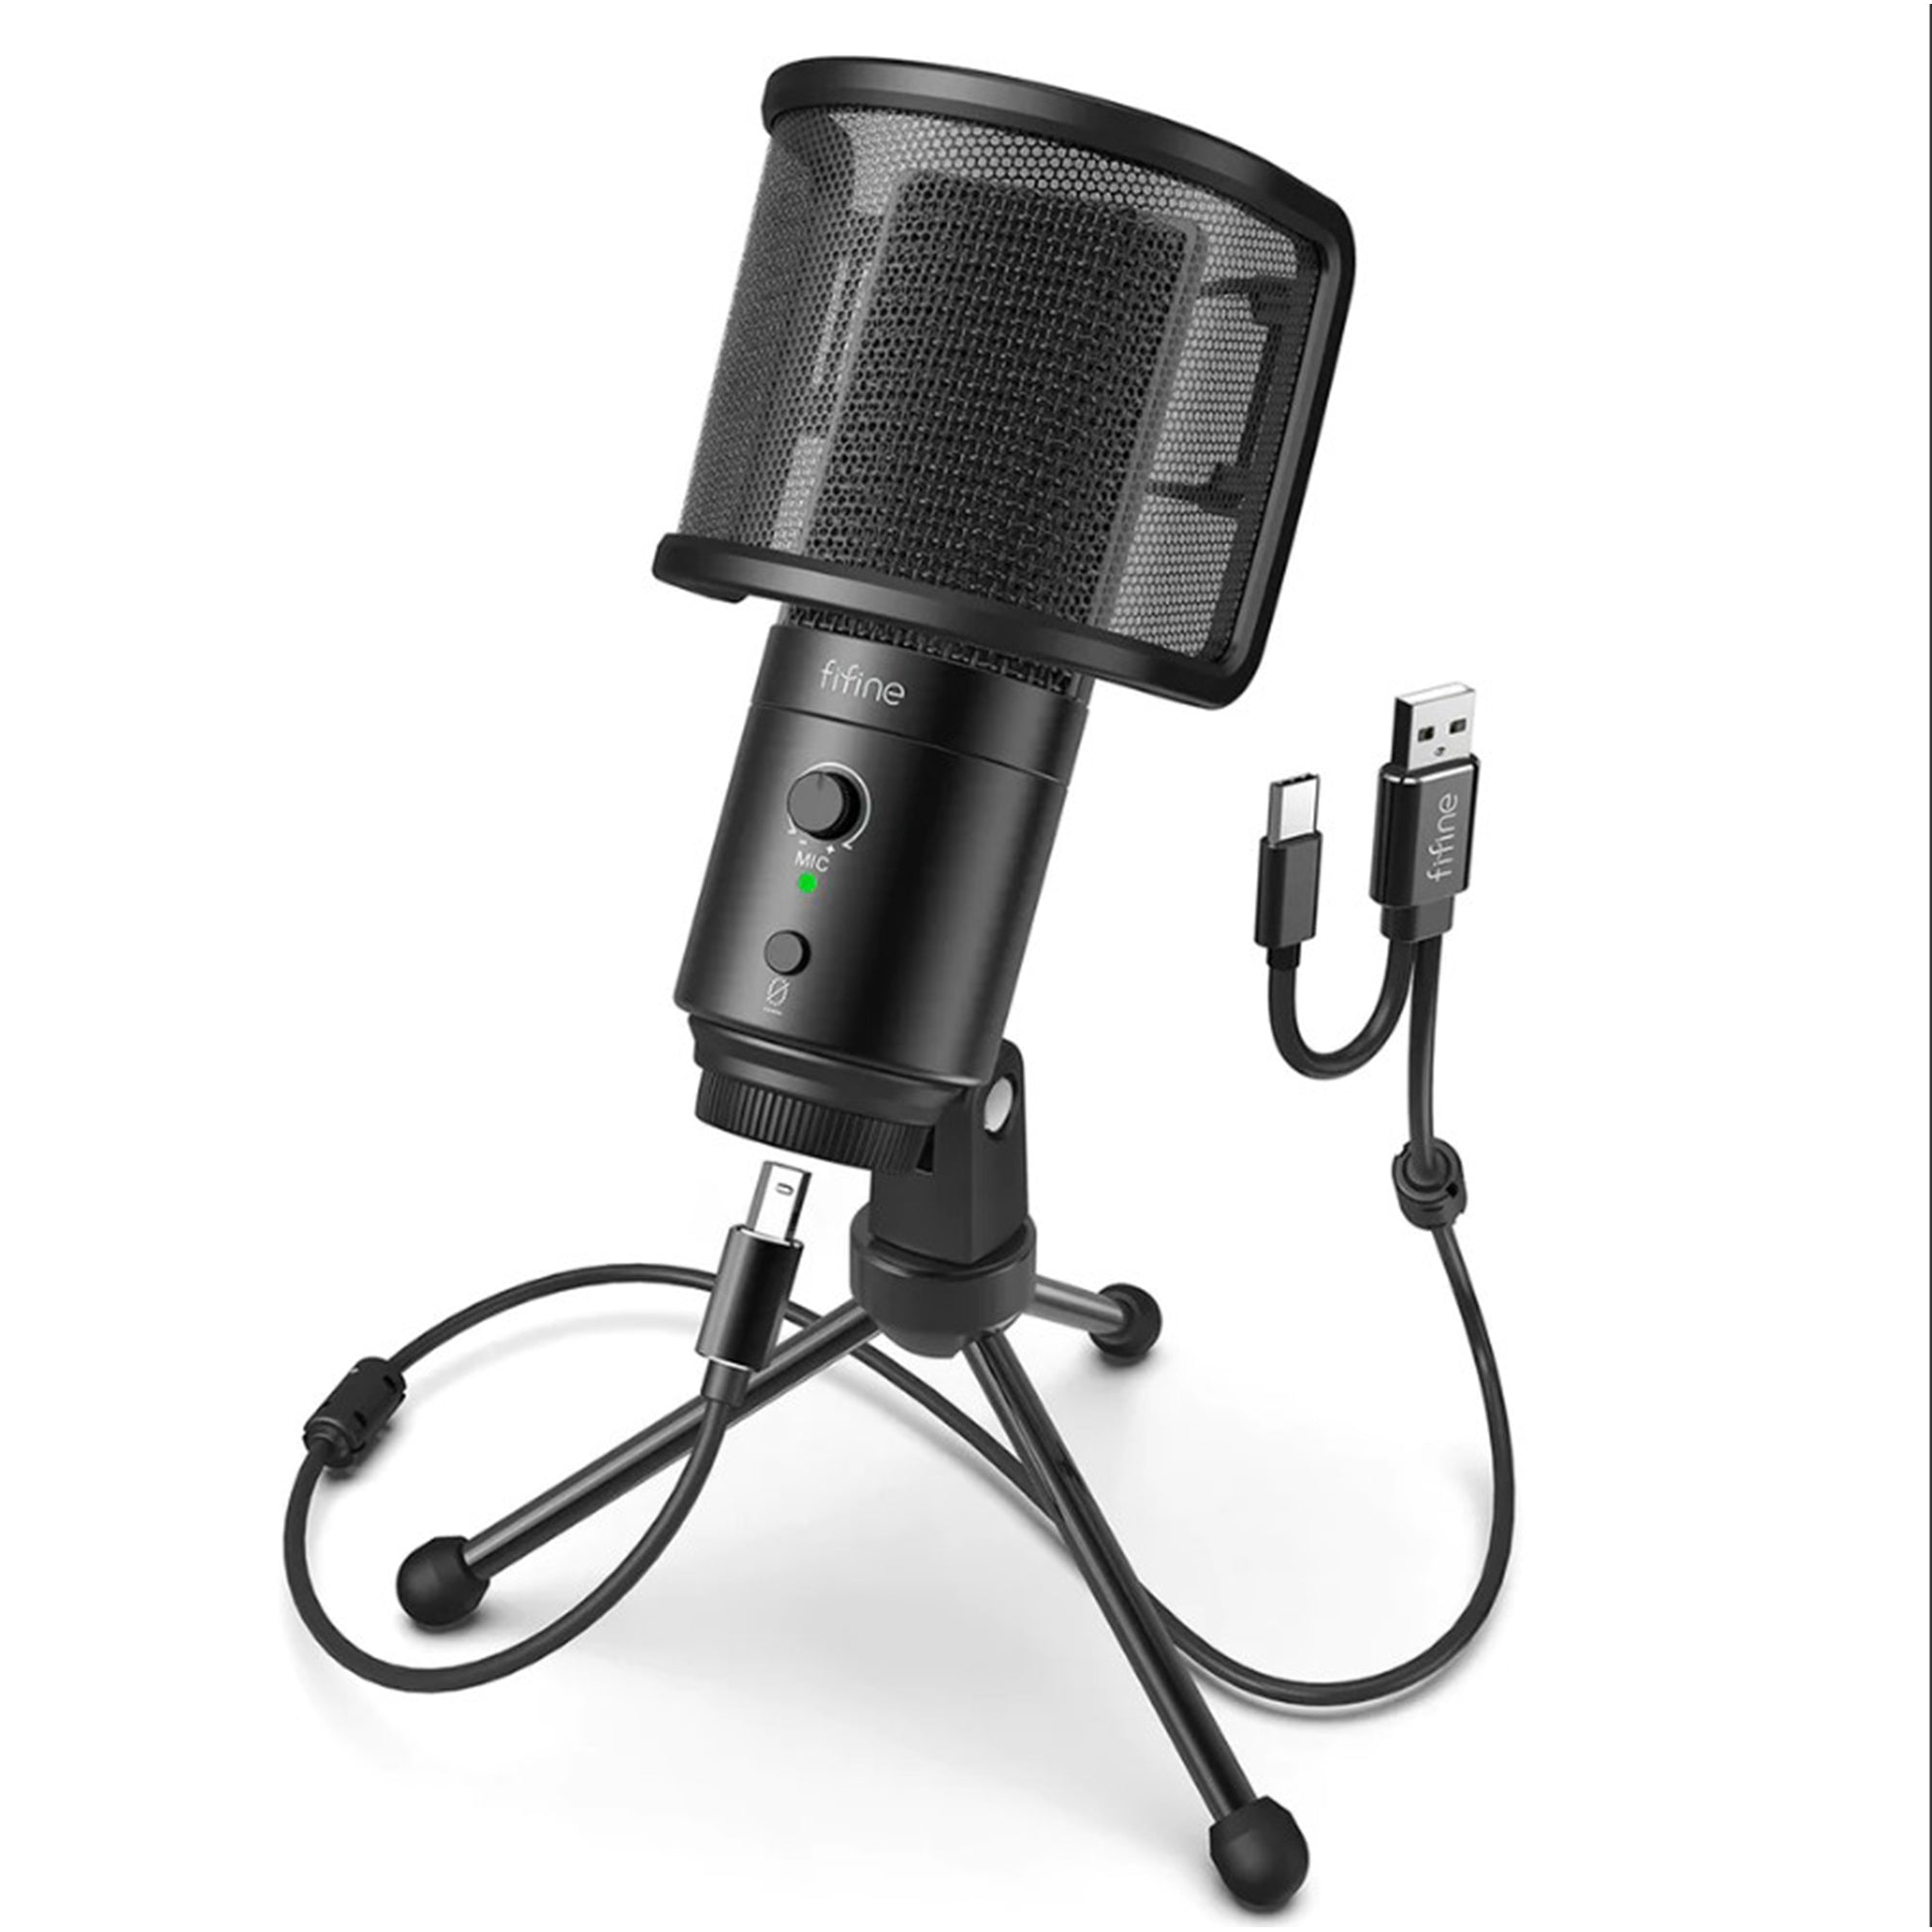 Fifine k683a type c usb mic with a pop filter, a volume dial, a mute b